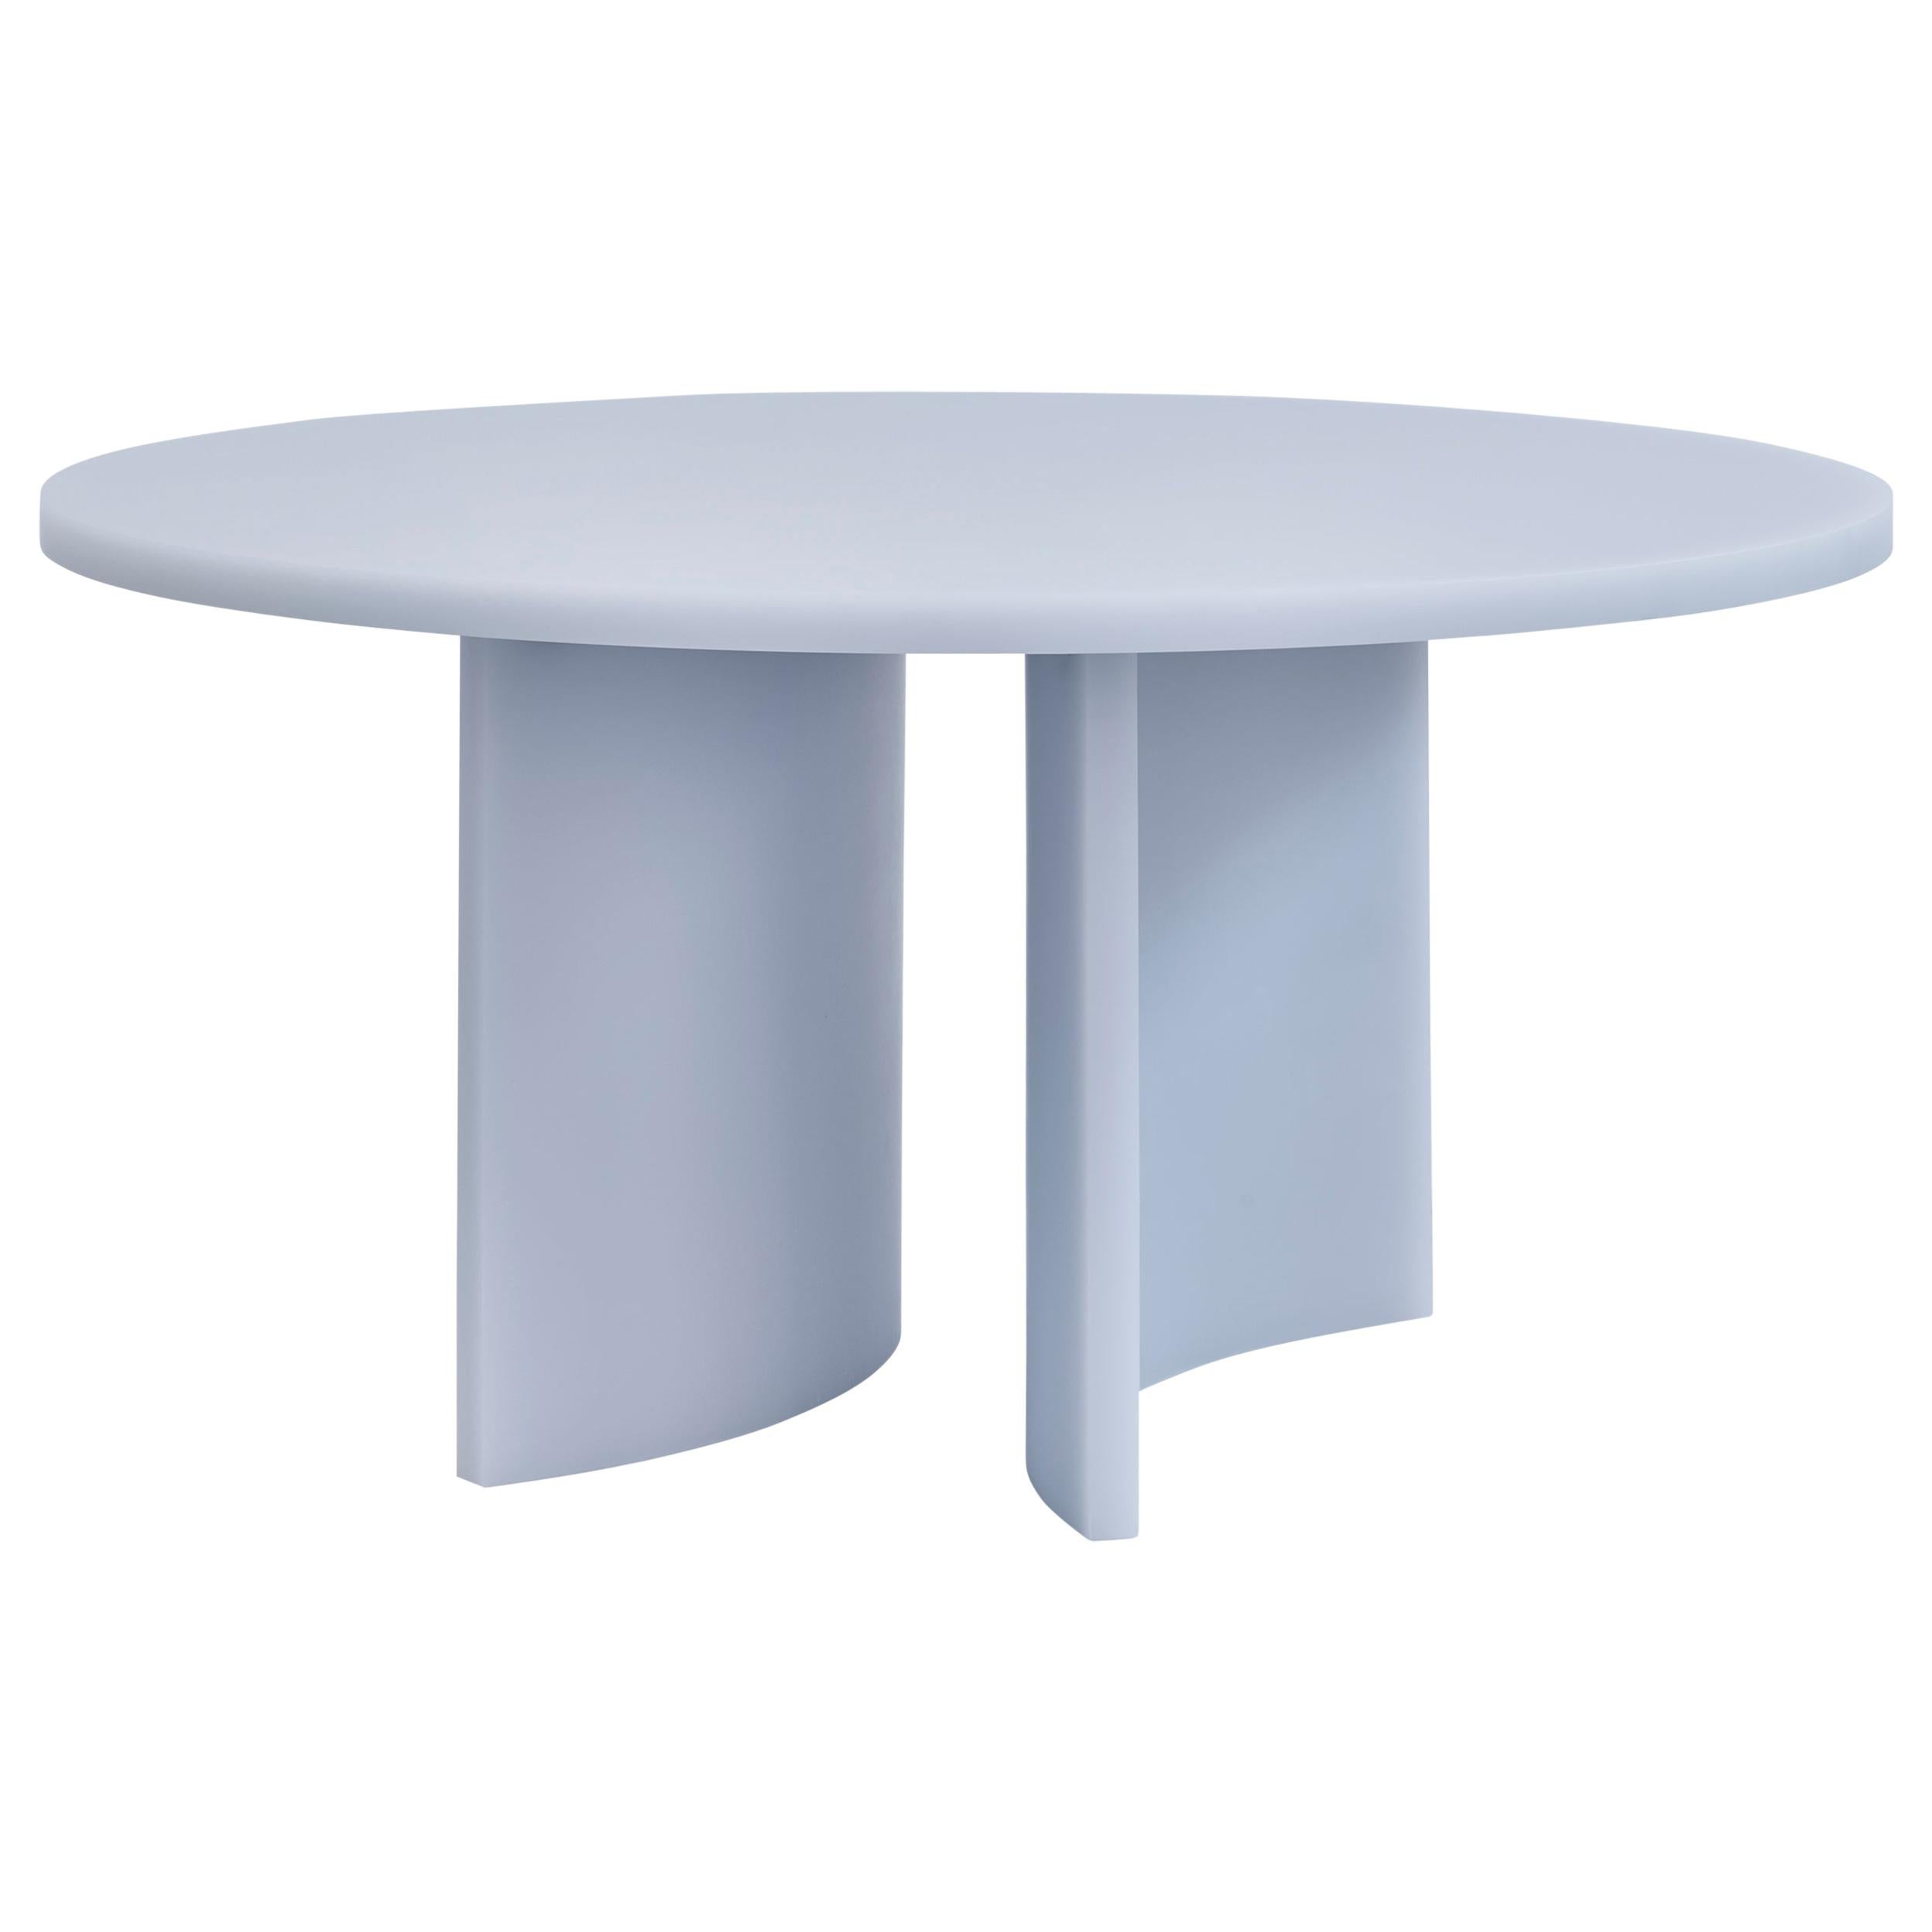 Contemporary Round Dining Table by Sabine Marcelis, Resin SOAP Series, Lavender